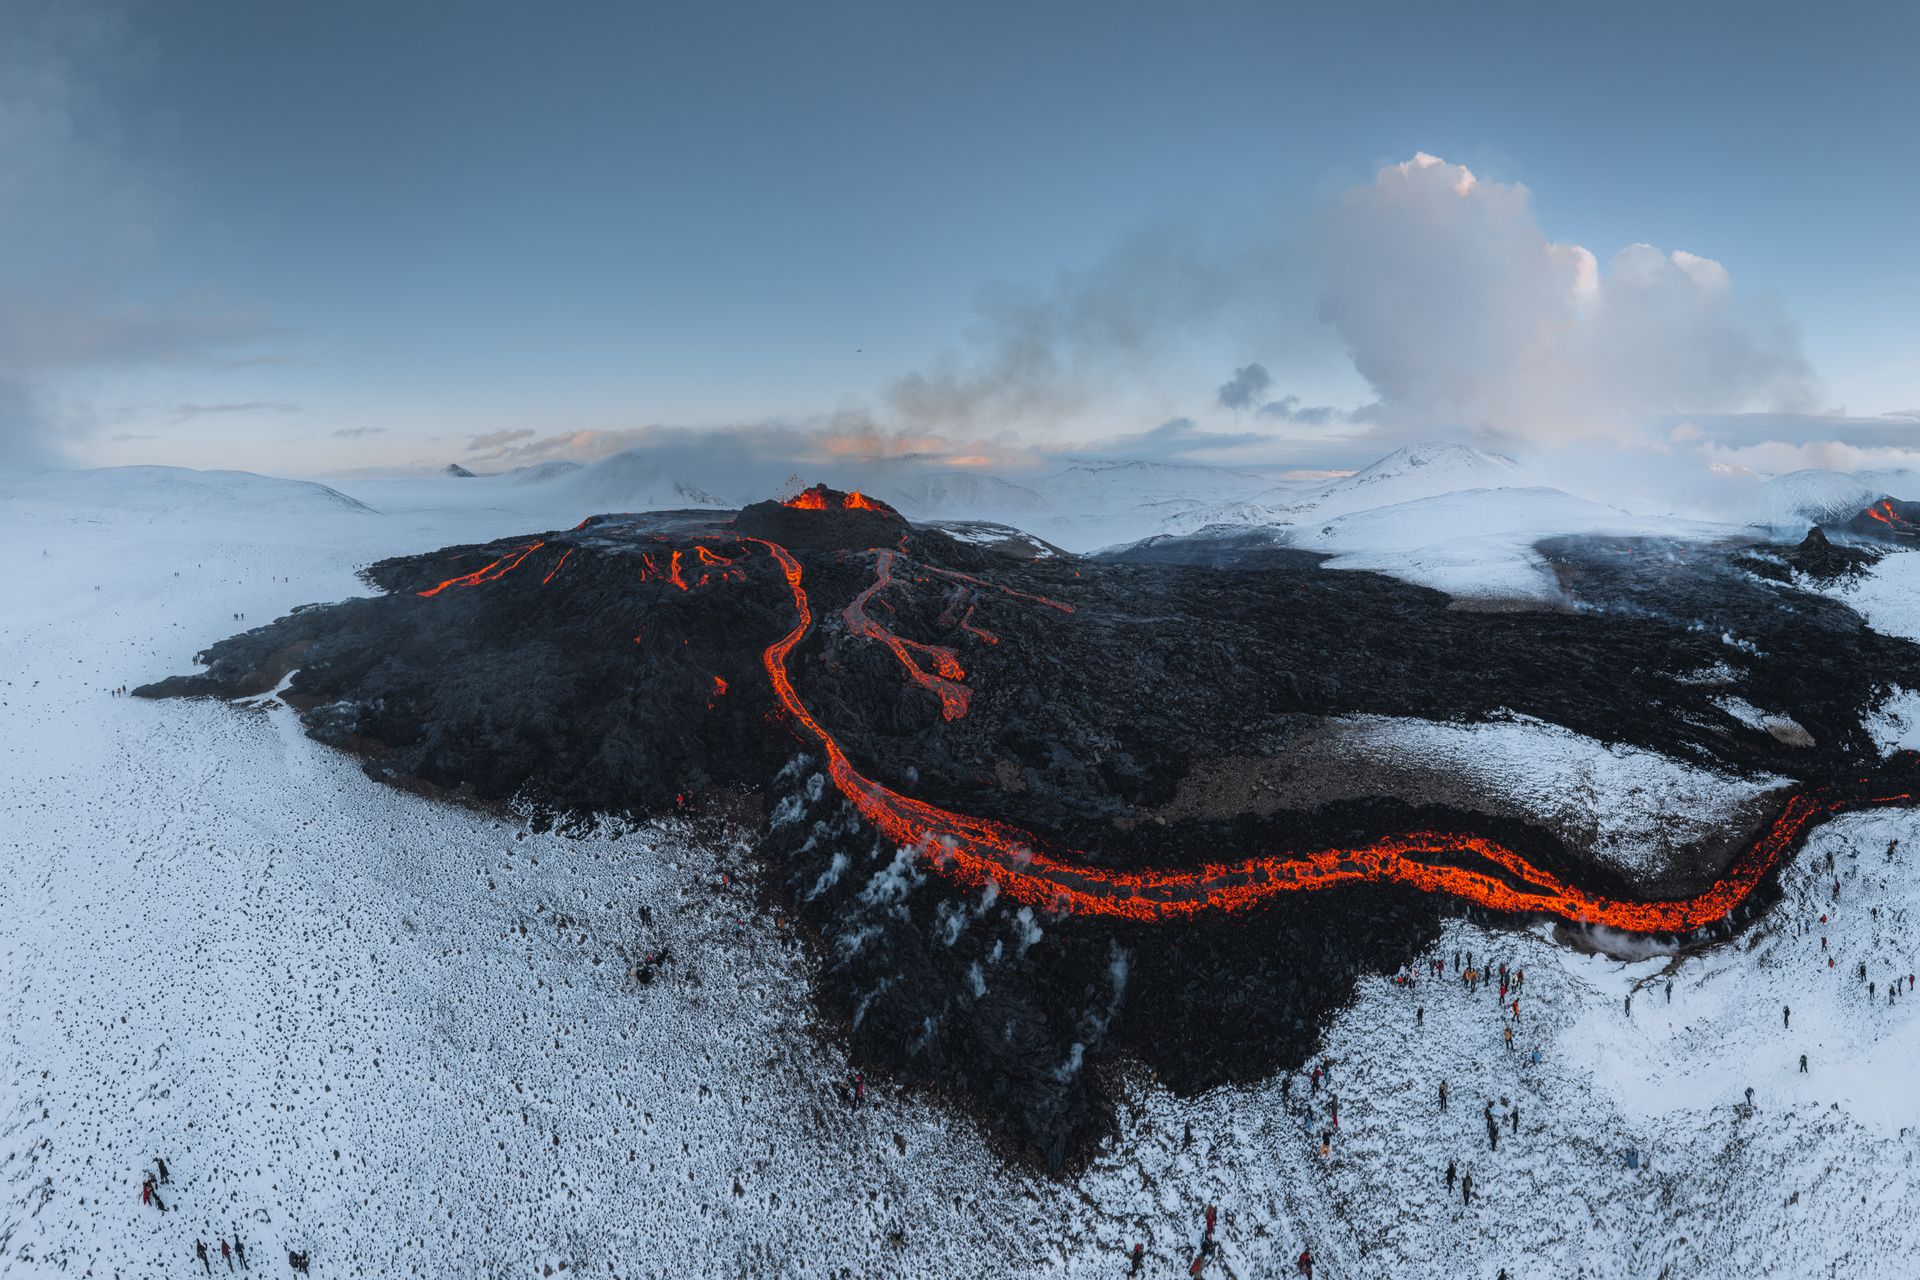 A stunning image of the Fagradalsfjall volcano eruption, one of the most popular Iceland volcanoes